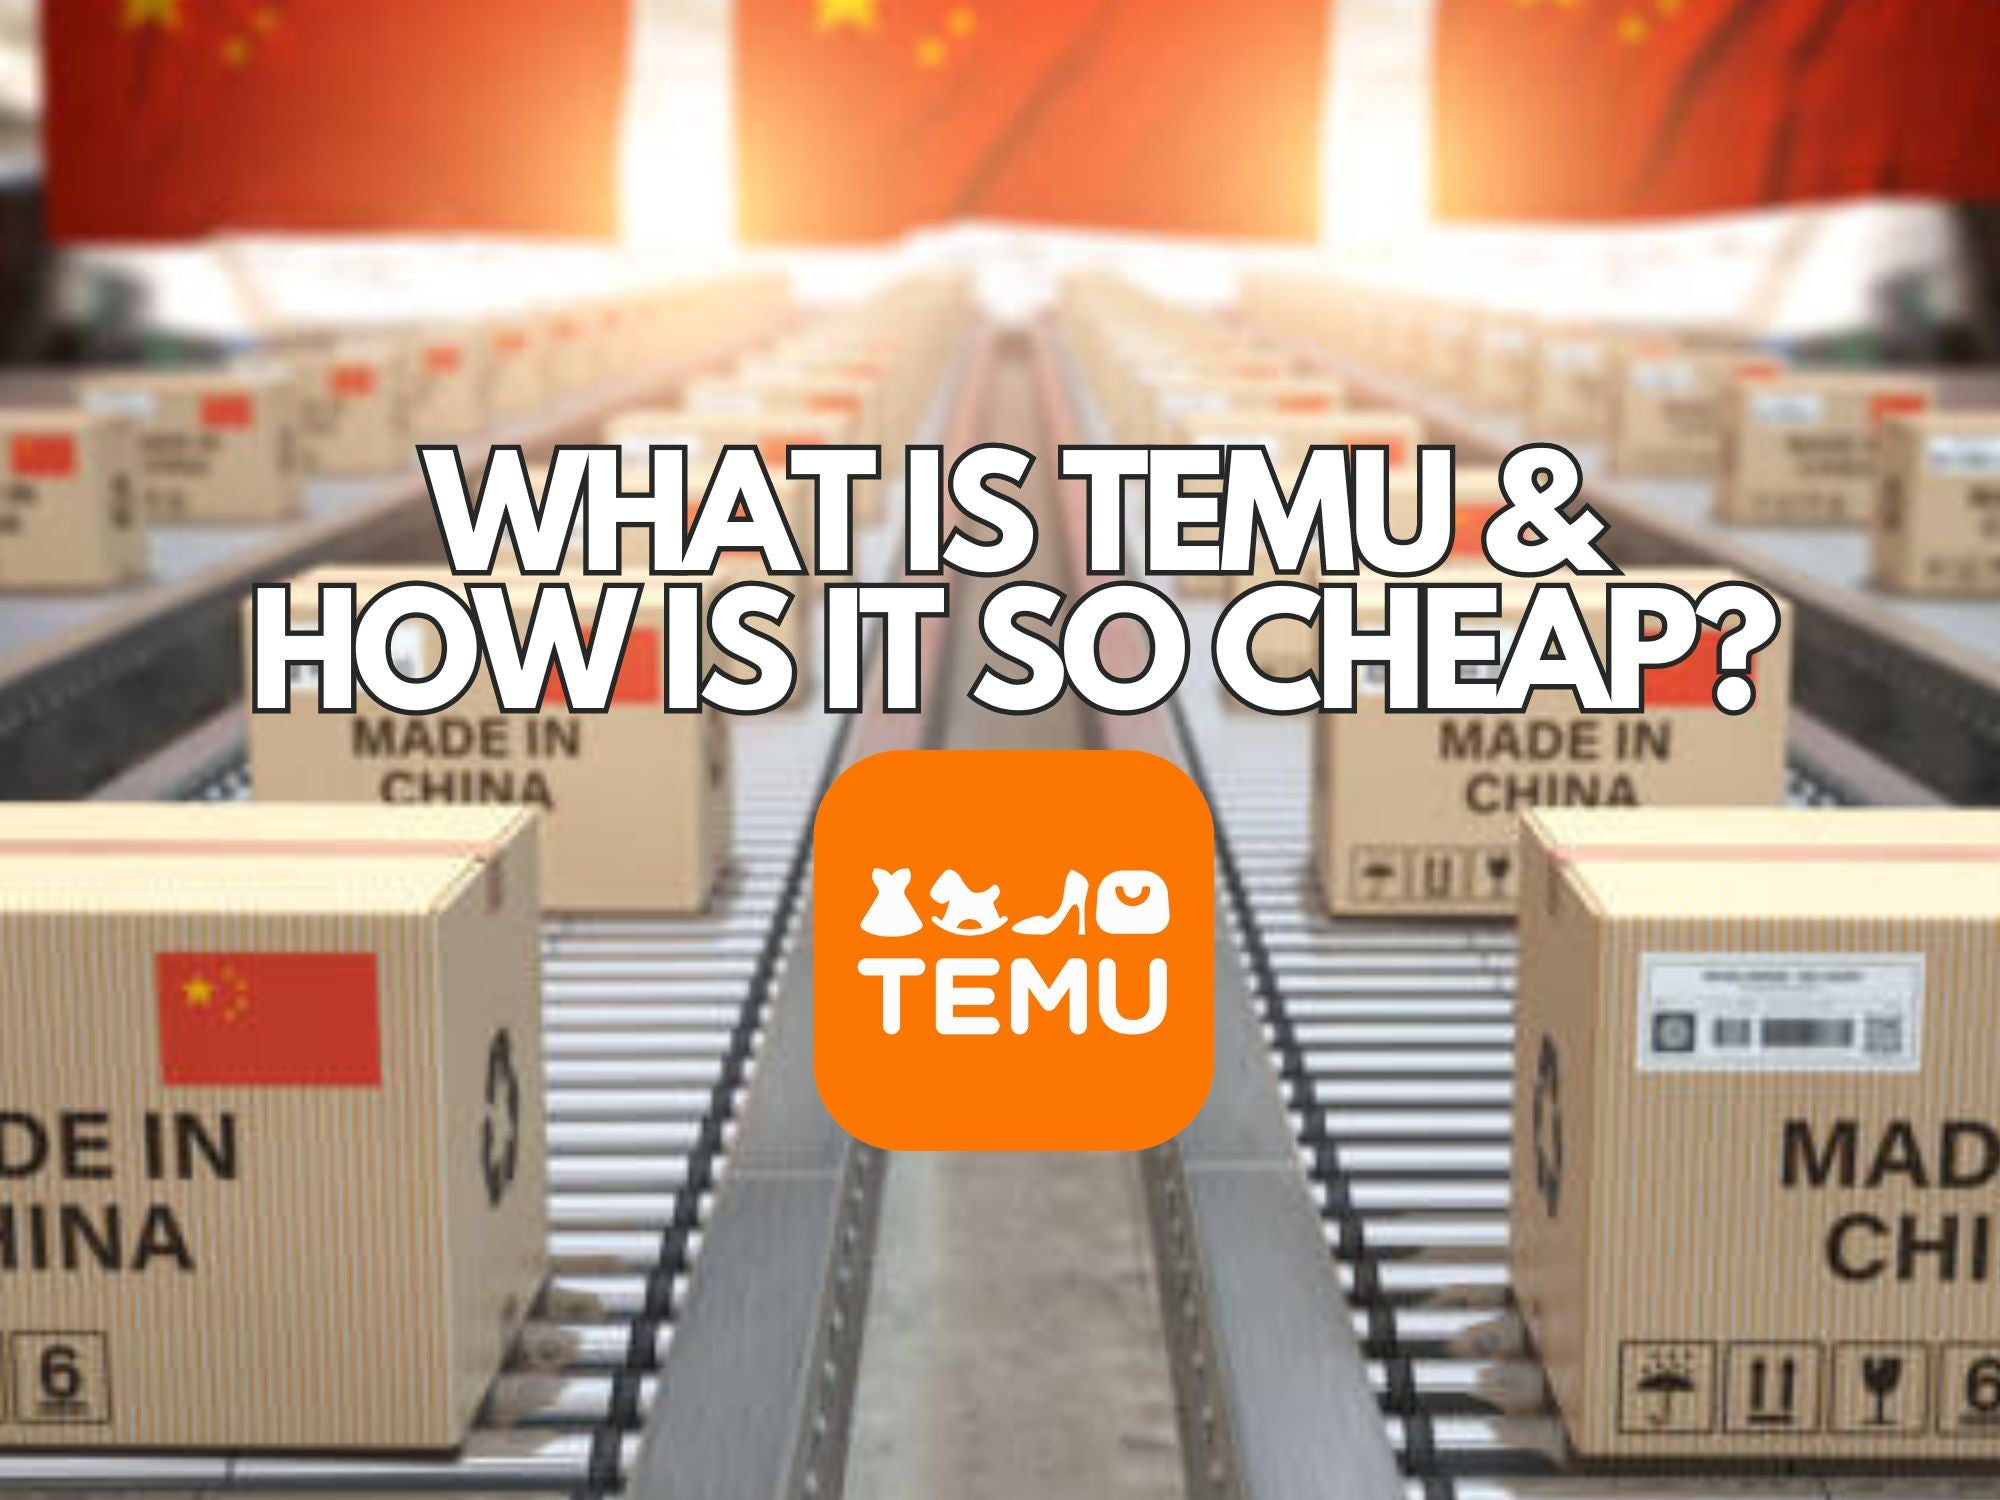 Think twice before buying something from Temu